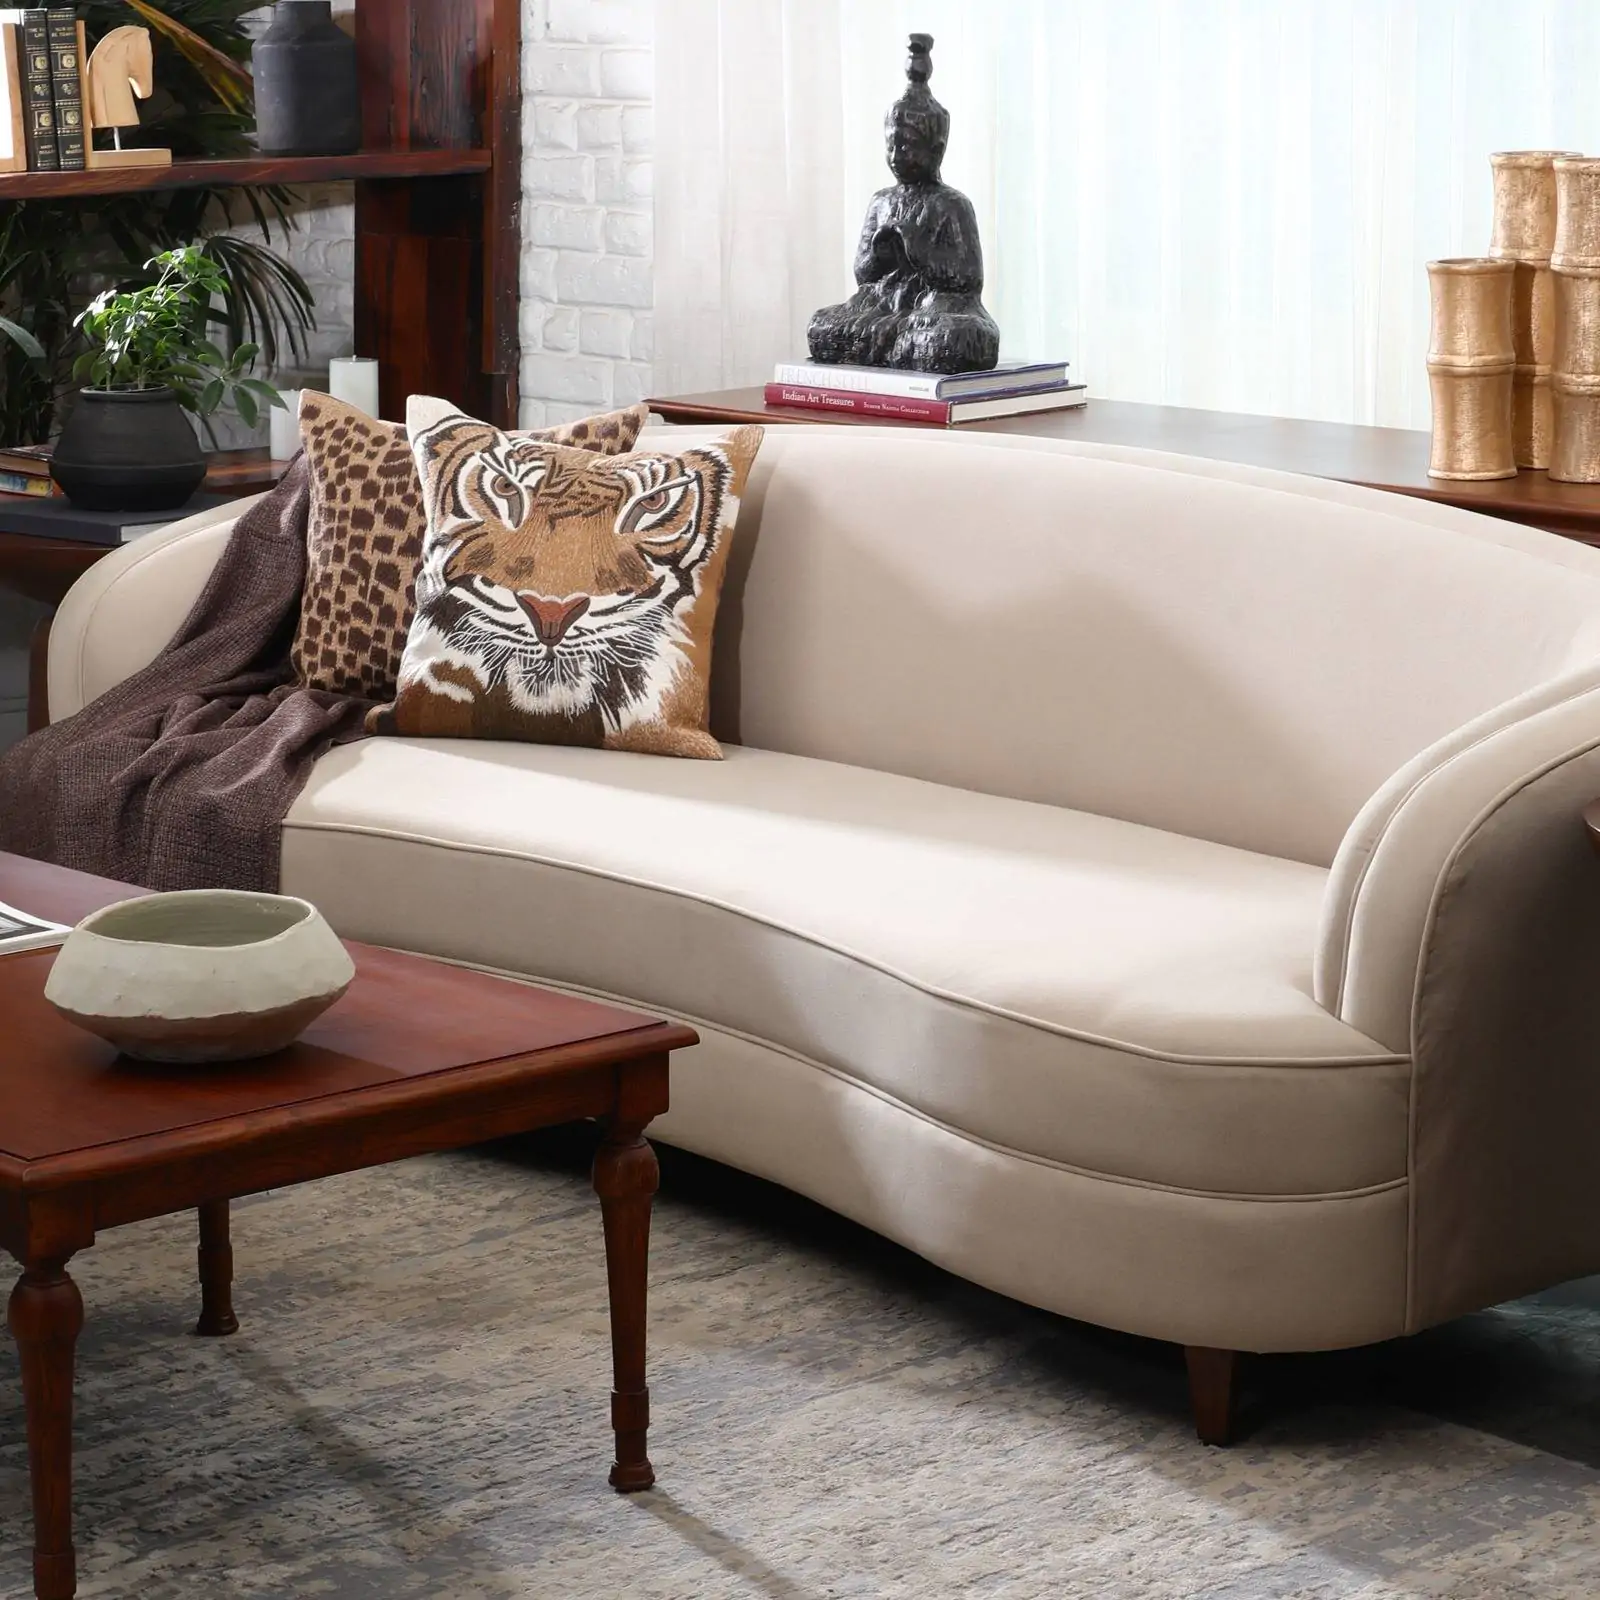 3 Seater Ivory Natural Upholstered Sofa